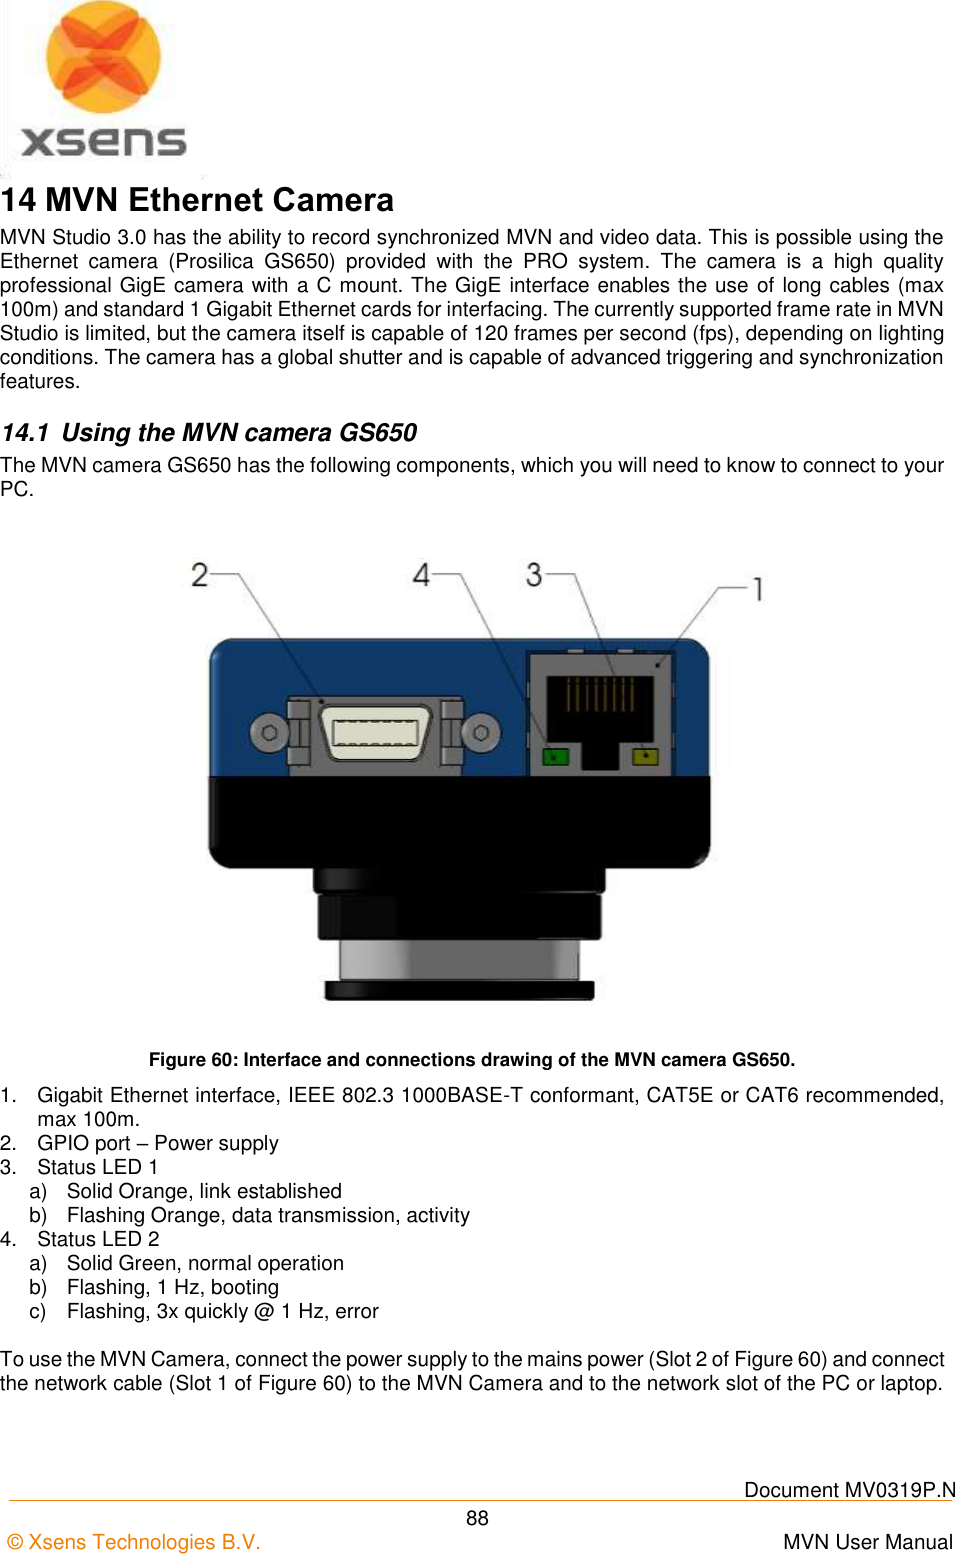    Document MV0319P.N © Xsens Technologies B.V.      MVN User Manual  88 14 MVN Ethernet Camera MVN Studio 3.0 has the ability to record synchronized MVN and video data. This is possible using the Ethernet  camera  (Prosilica  GS650)  provided  with  the  PRO  system.  The  camera  is  a  high  quality professional GigE camera with a C mount. The GigE interface enables the use of long cables (max 100m) and standard 1 Gigabit Ethernet cards for interfacing. The currently supported frame rate in MVN Studio is limited, but the camera itself is capable of 120 frames per second (fps), depending on lighting conditions. The camera has a global shutter and is capable of advanced triggering and synchronization features. 14.1  Using the MVN camera GS650 The MVN camera GS650 has the following components, which you will need to know to connect to your PC.  Figure 60: Interface and connections drawing of the MVN camera GS650. 1.  Gigabit Ethernet interface, IEEE 802.3 1000BASE-T conformant, CAT5E or CAT6 recommended, max 100m. 2.  GPIO port – Power supply 3.  Status LED 1 a)  Solid Orange, link established b)  Flashing Orange, data transmission, activity 4.  Status LED 2 a)  Solid Green, normal operation b)  Flashing, 1 Hz, booting c)  Flashing, 3x quickly @ 1 Hz, error  To use the MVN Camera, connect the power supply to the mains power (Slot 2 of Figure 60) and connect the network cable (Slot 1 of Figure 60) to the MVN Camera and to the network slot of the PC or laptop. 